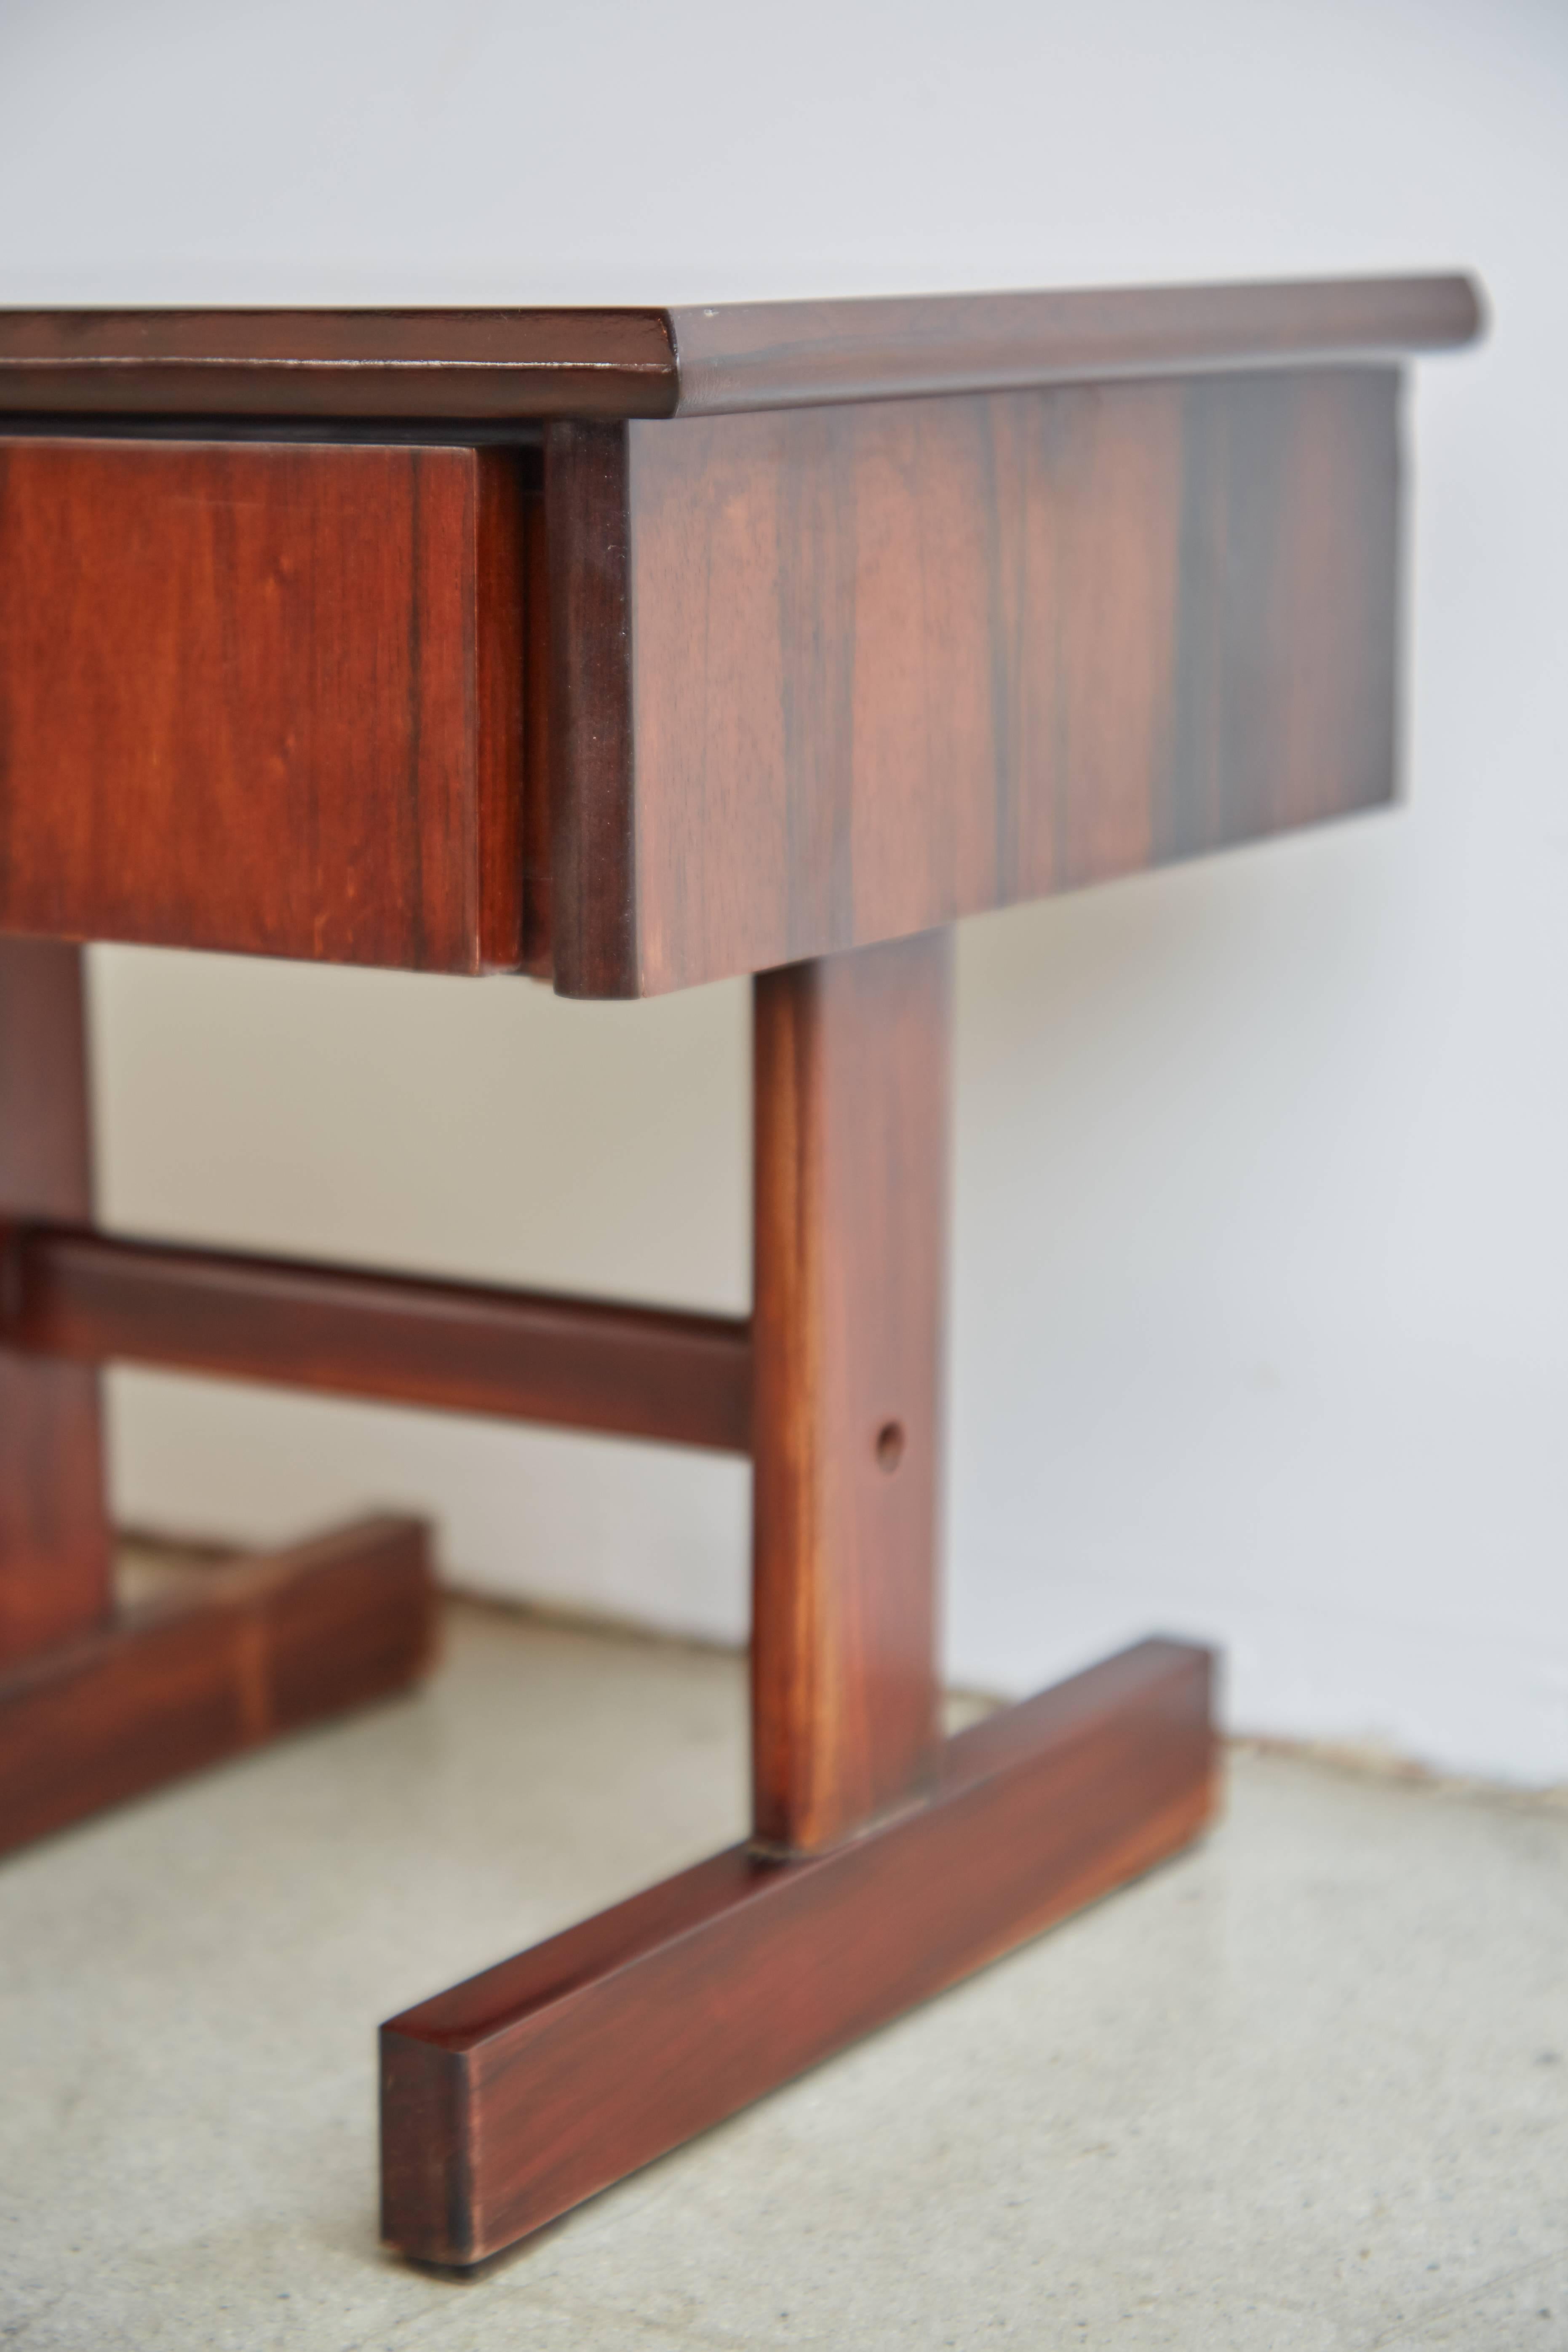 Pair (2) of restored nightstands or side tables fabricated from Brazilian Rosewood. These bijou pieces feature a clean, contemporary design and both include a single drawer which functions easily, perfect for small storage needs. 

The compact